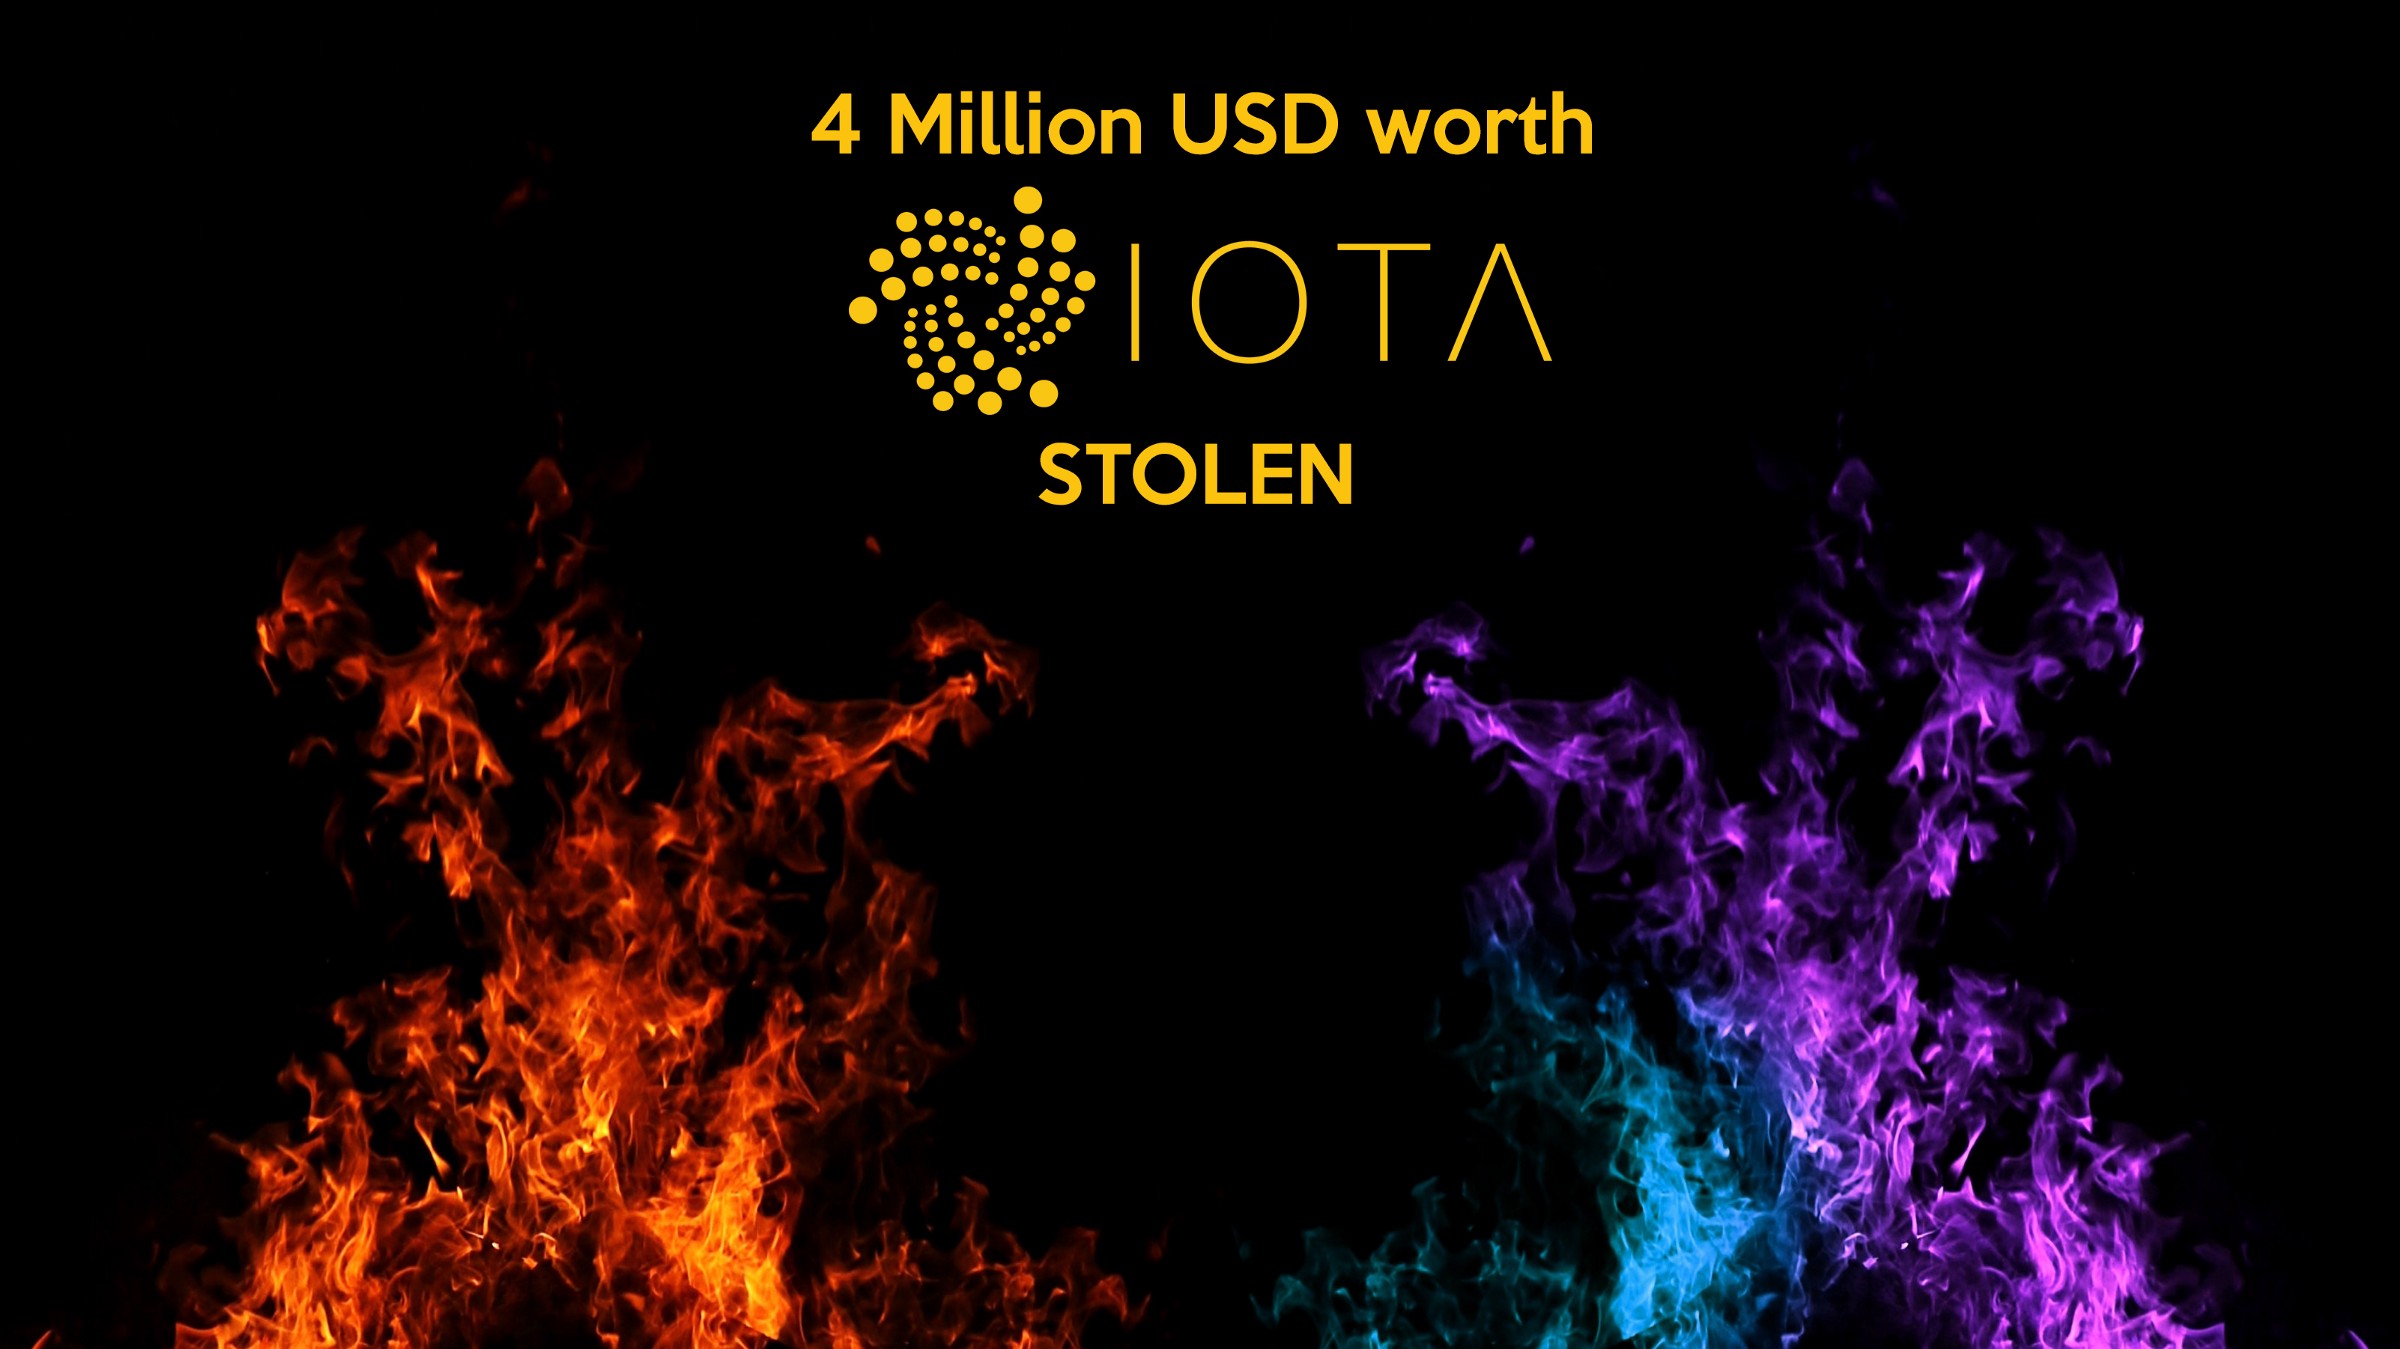 Missing Iota In Wallet Read This Now By - roblox meme attack roblox generator 2018 no human verification